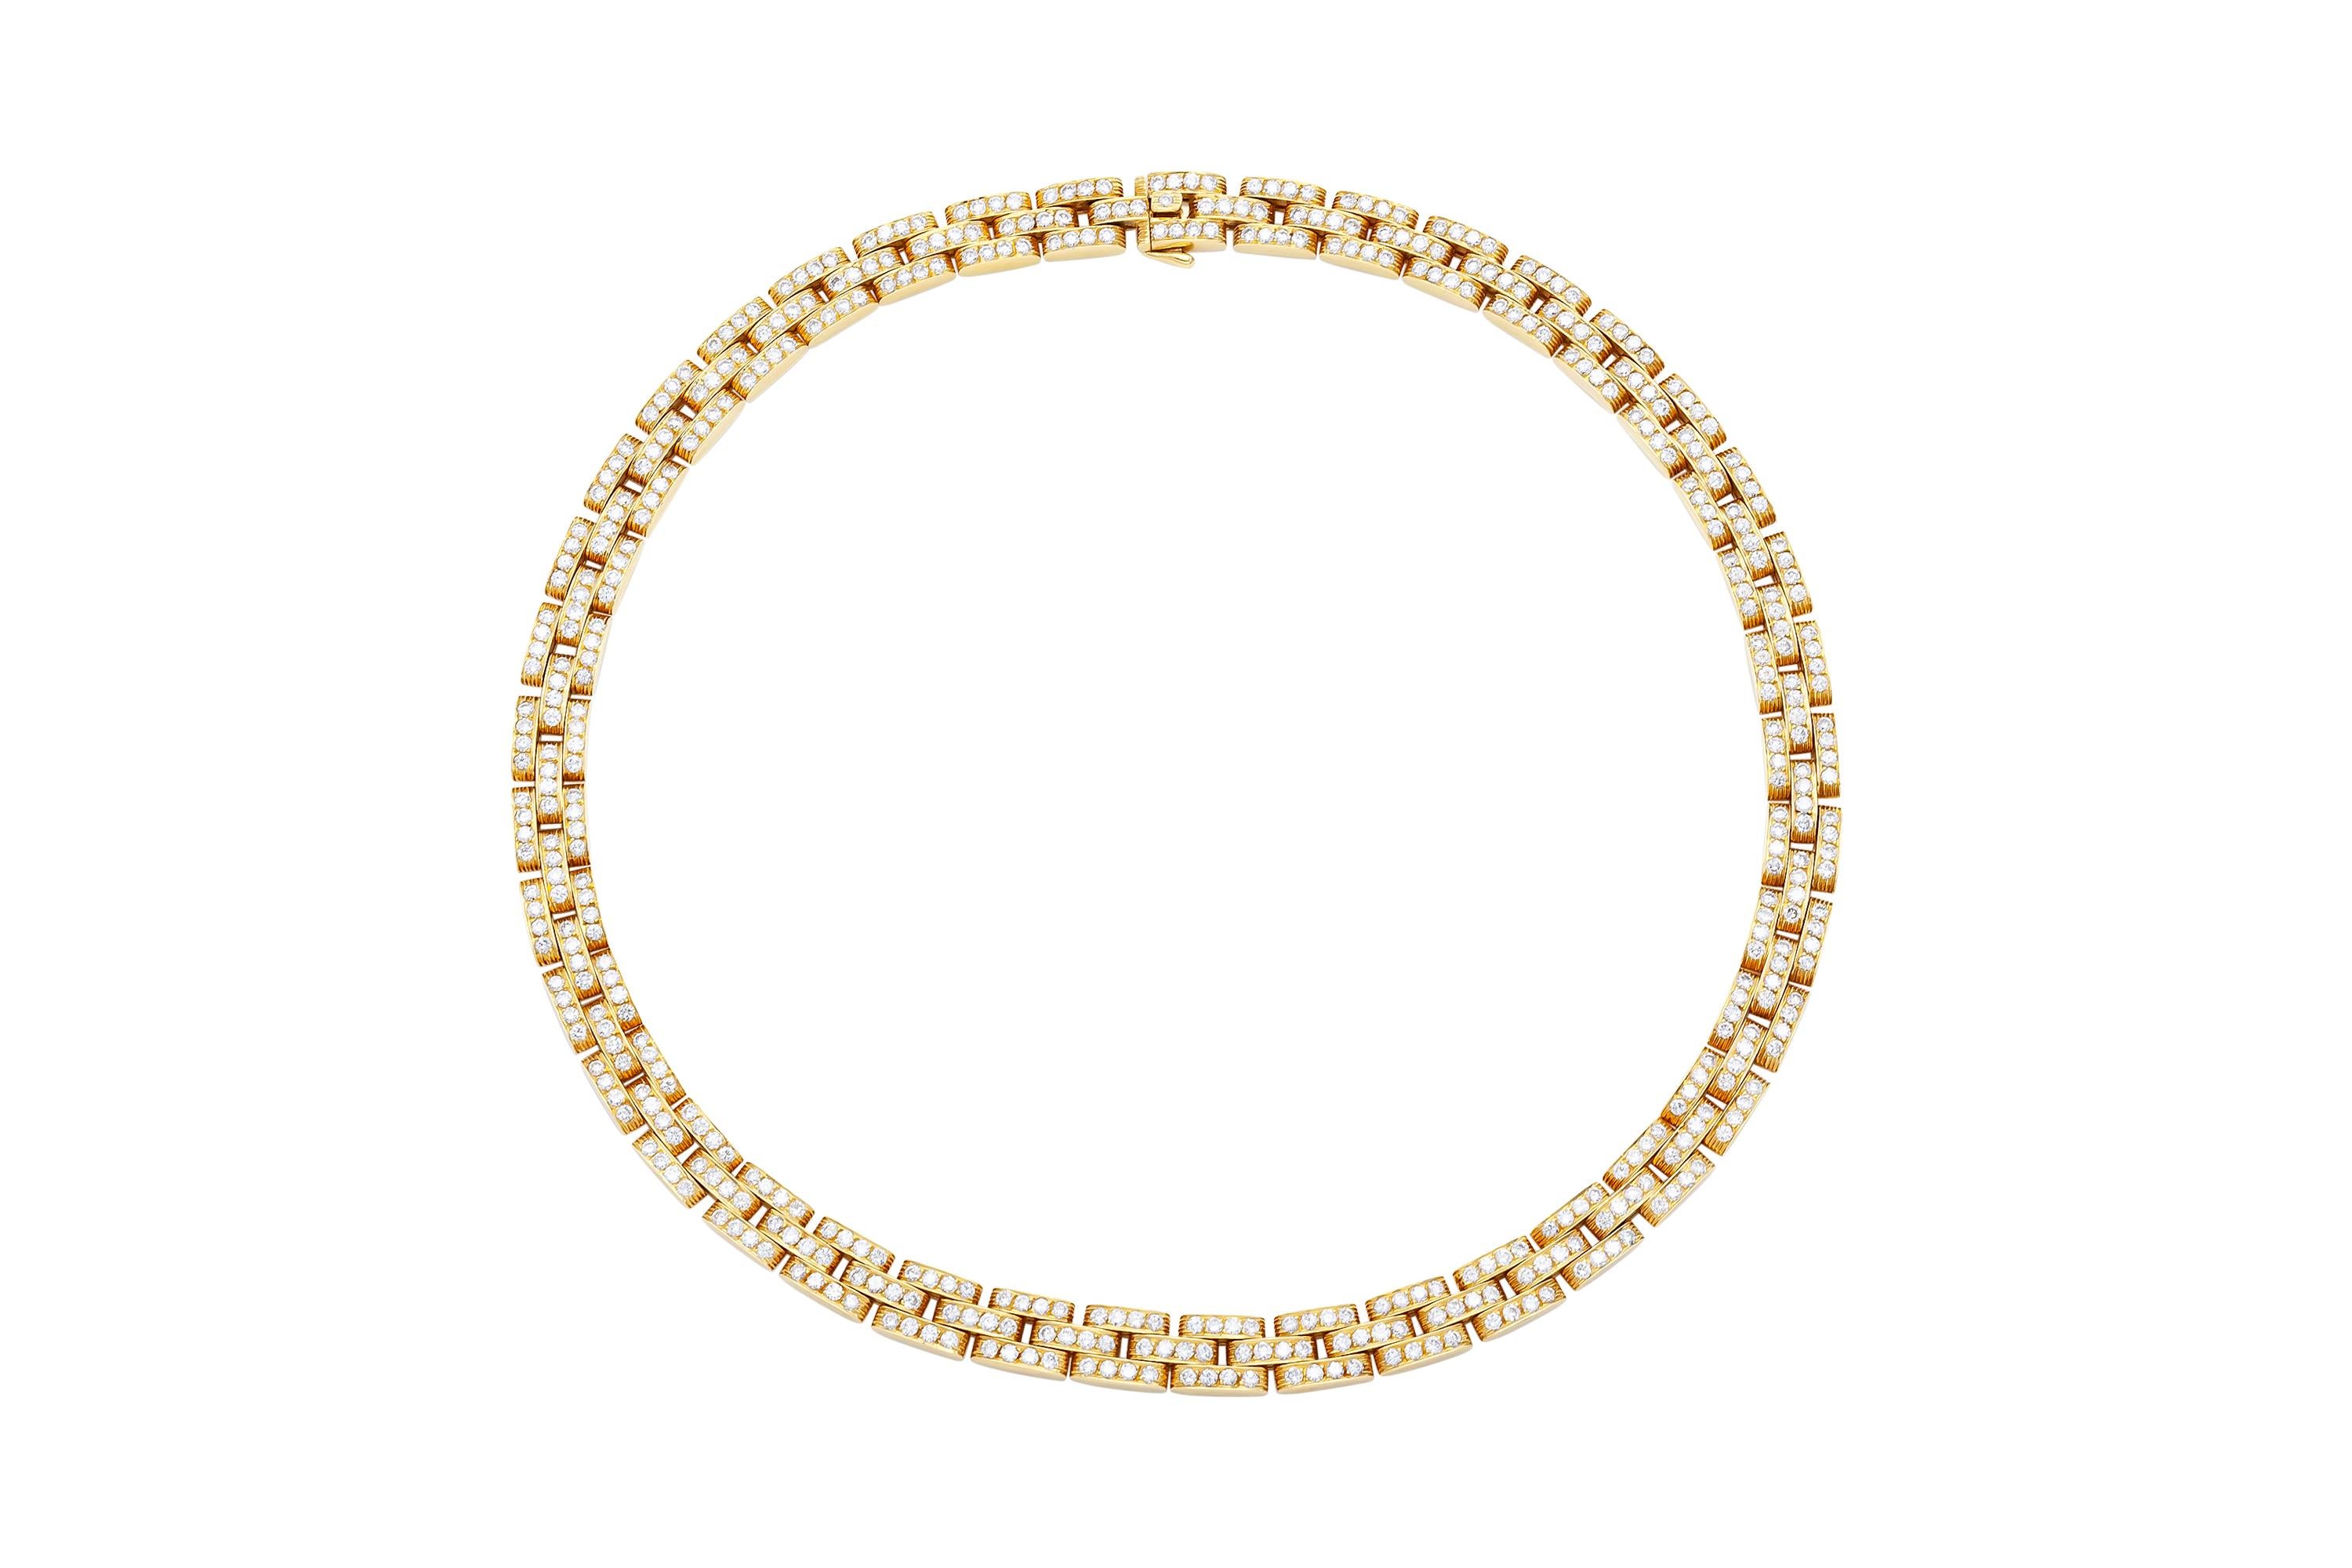 Finely crafted in 18k yellow gold with round brilliant cut diamonds weighing approximately a total of 15.00 carats.
Signed by Cartier
From their Panthere Links collections
16 1/4 inches